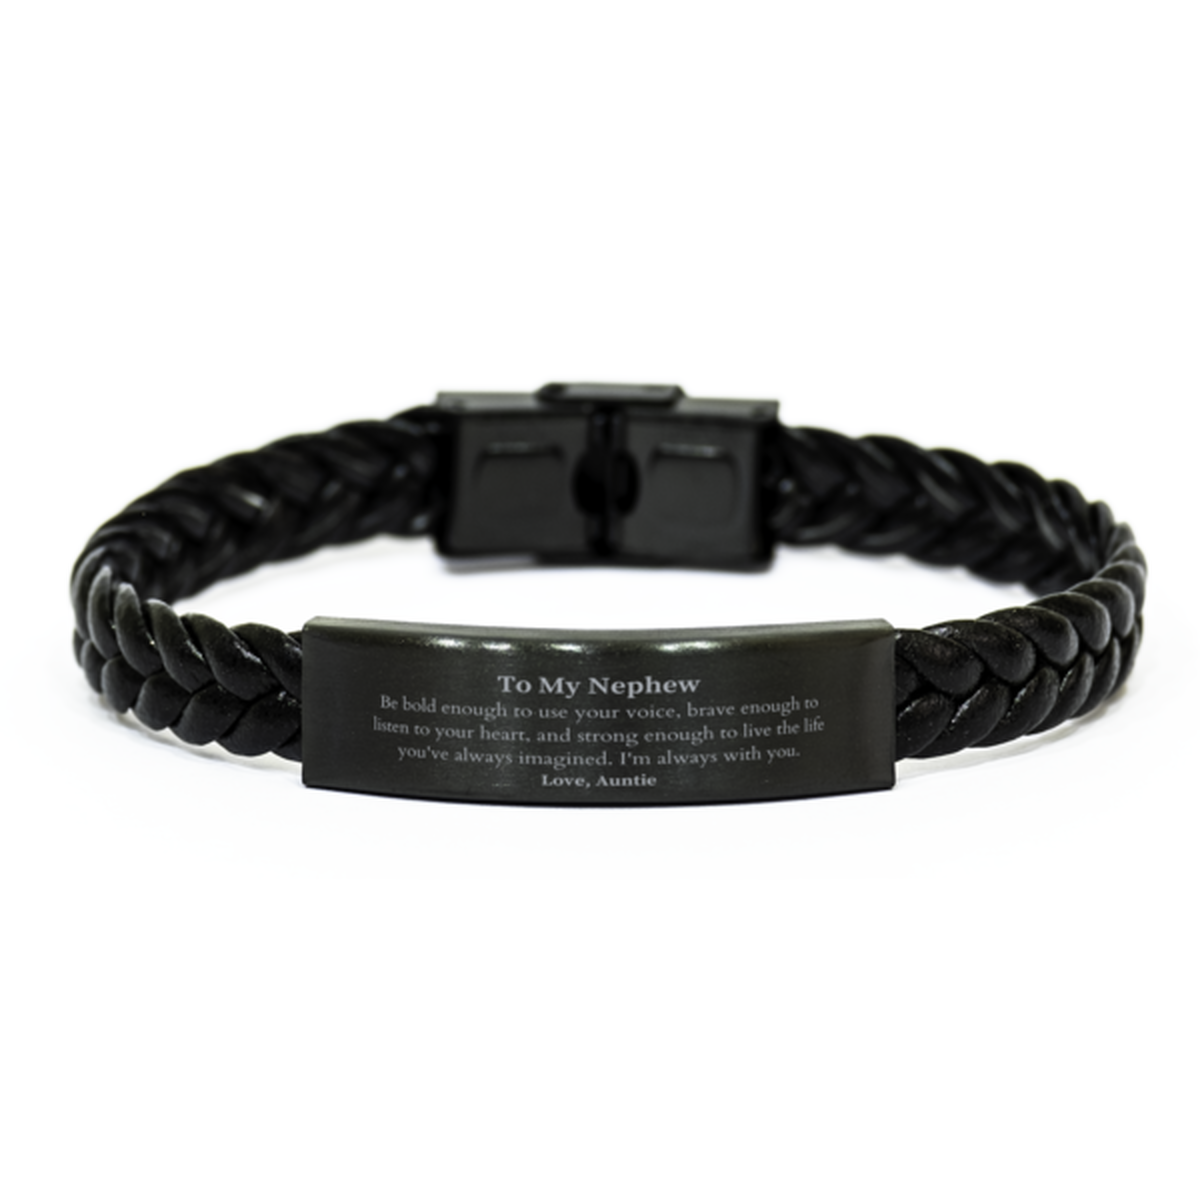 Keepsake Nephew Braided Leather Bracelet Gift Idea Graduation Christmas Birthday Nephew from Auntie, Nephew Be bold enough to use your voice, brave enough to listen to your heart. Love, Auntie